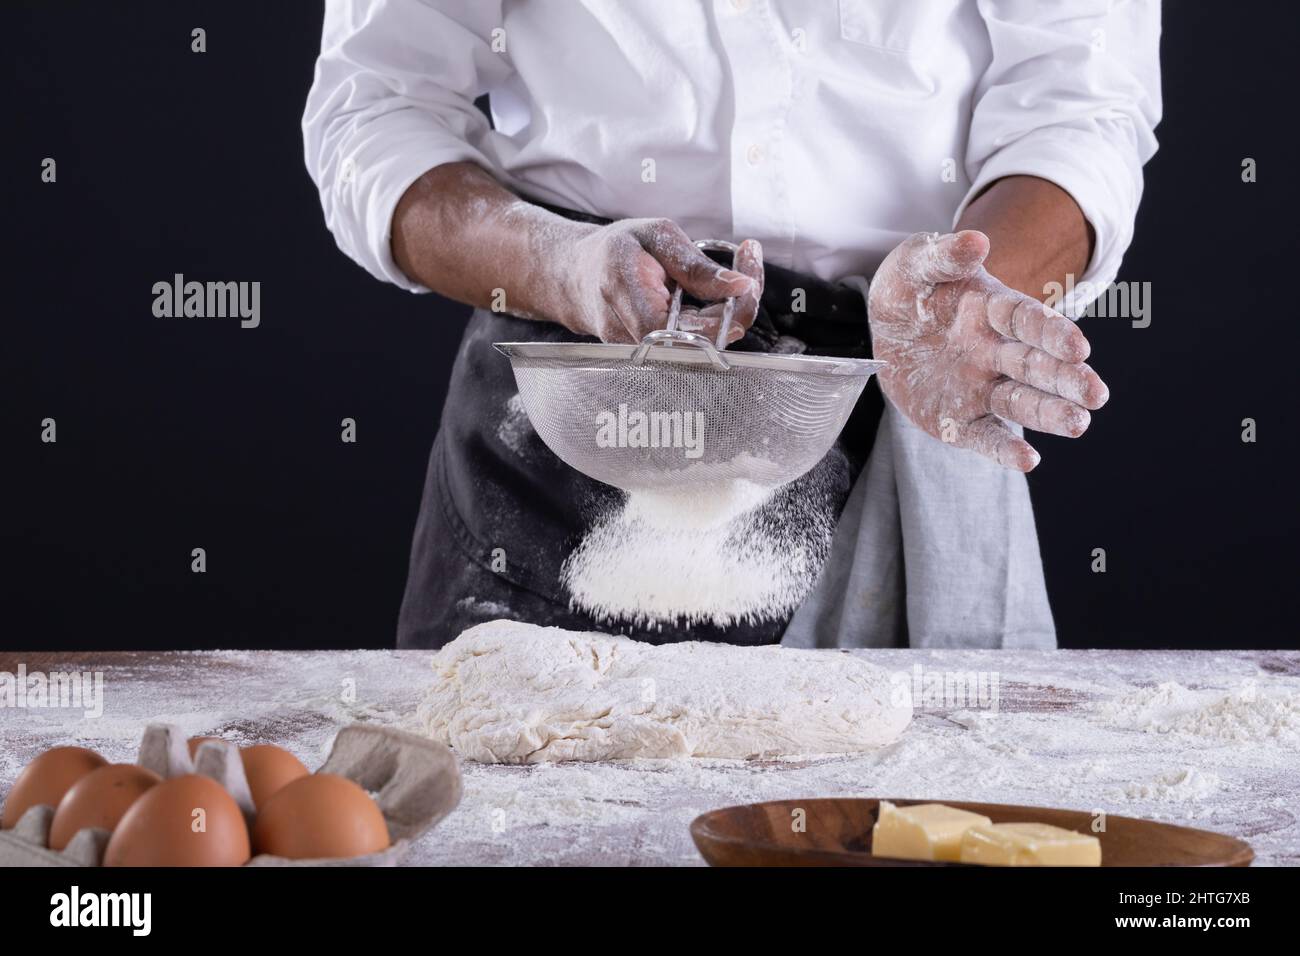 Midsection of african american male baker sieving flour on dough while standing Stock Photo